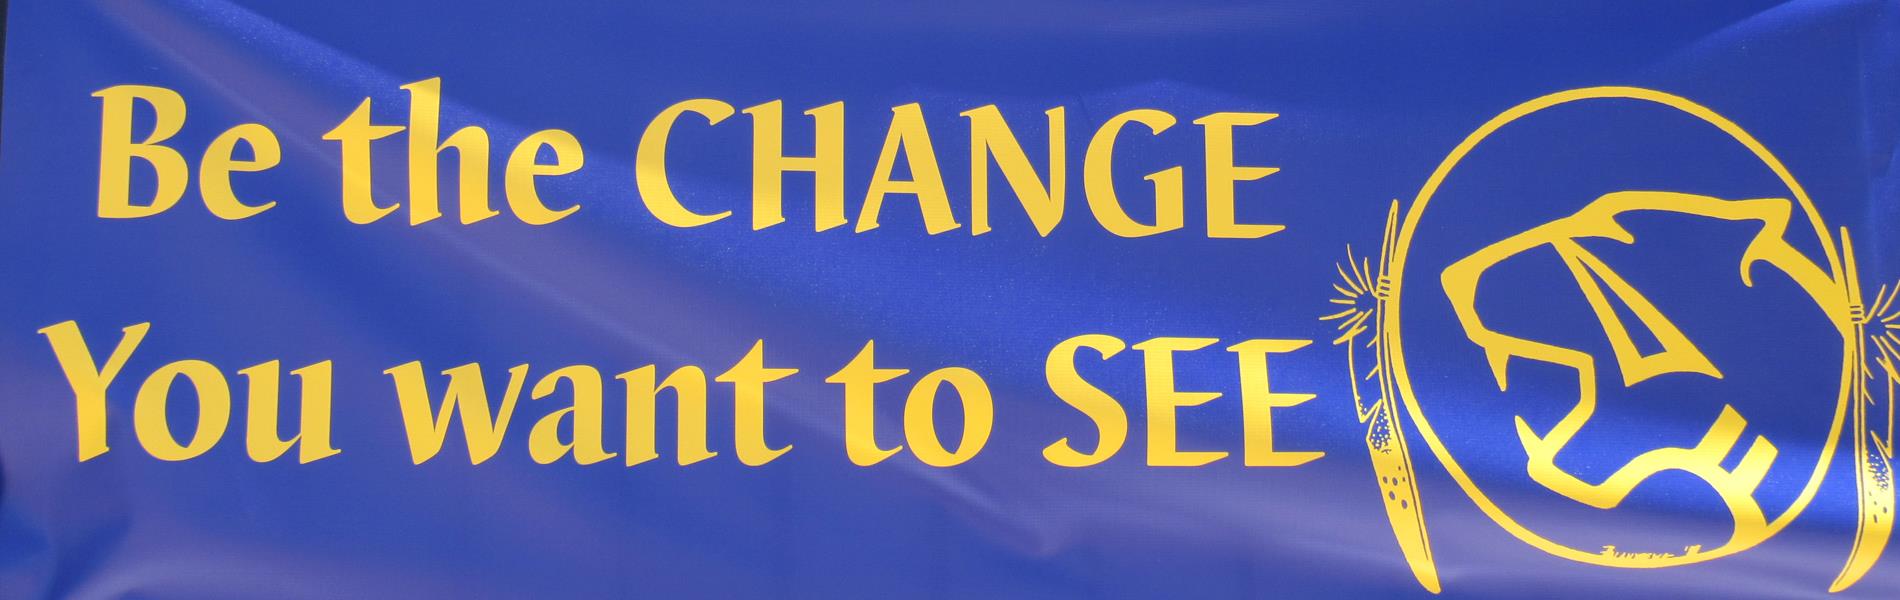 Banner saying be the change you want to see